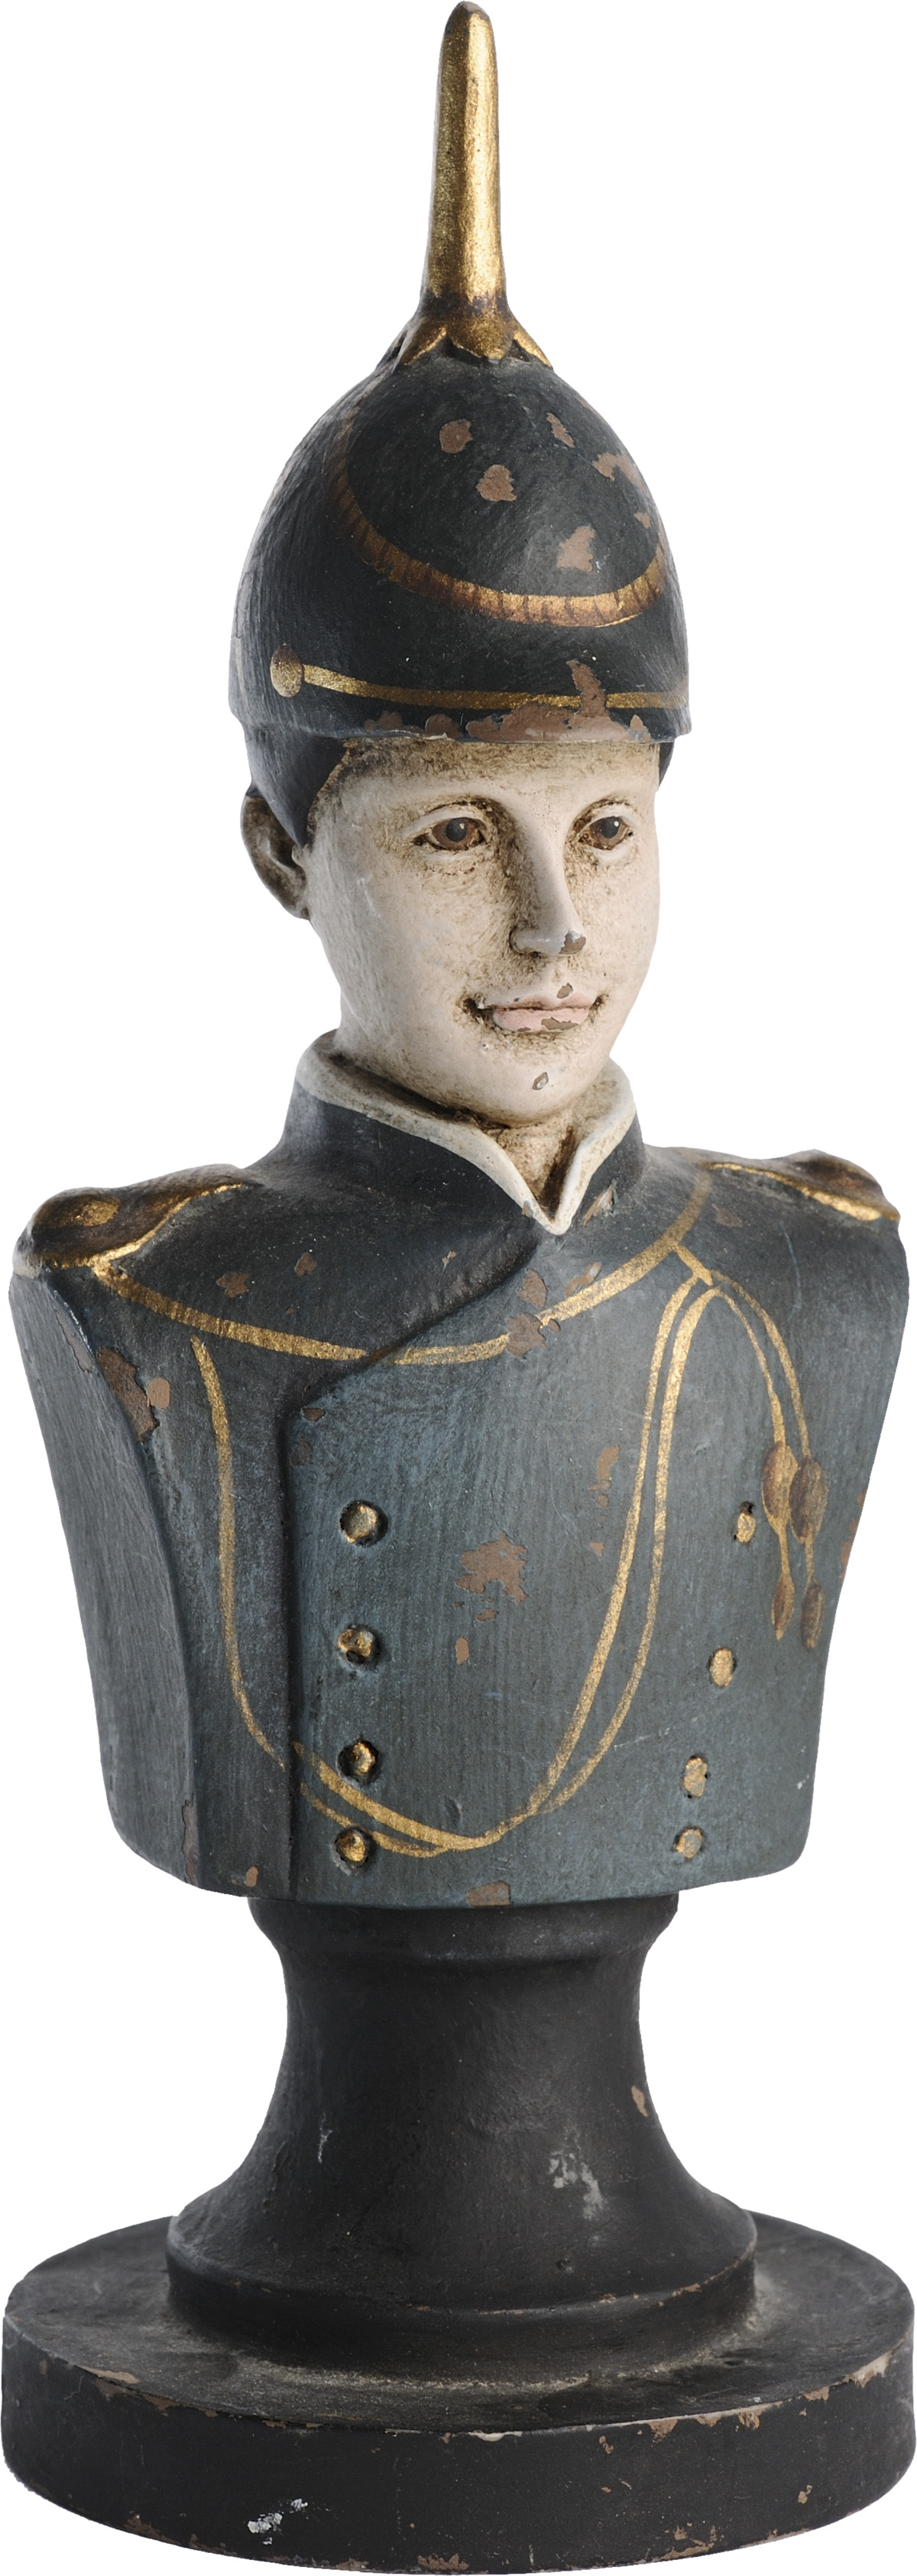 Austria Officer with spiked helmet, Ceramic bust painted, 20th Century - Image 2 of 2